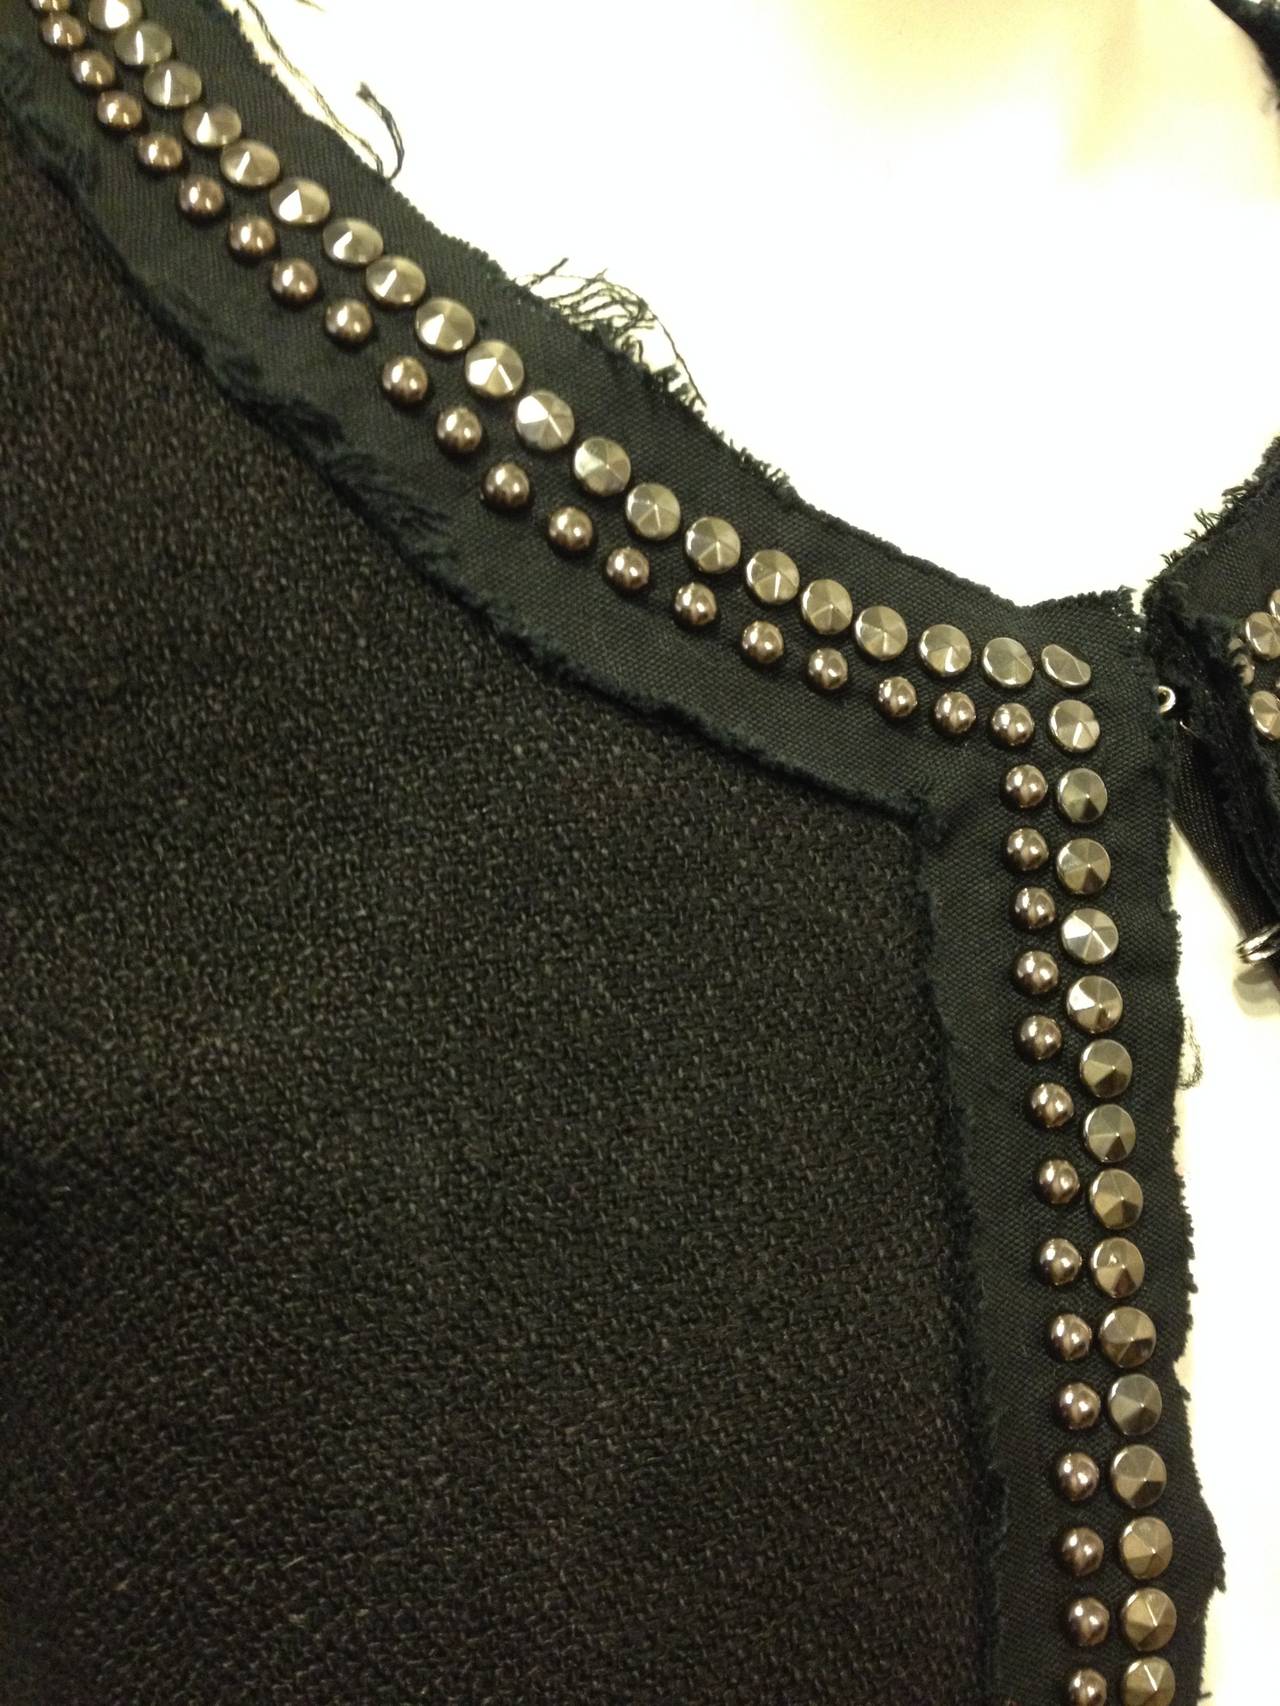 Balmain Black Tweed Jacket with Silver Winged Pyramid In Excellent Condition For Sale In San Francisco, CA